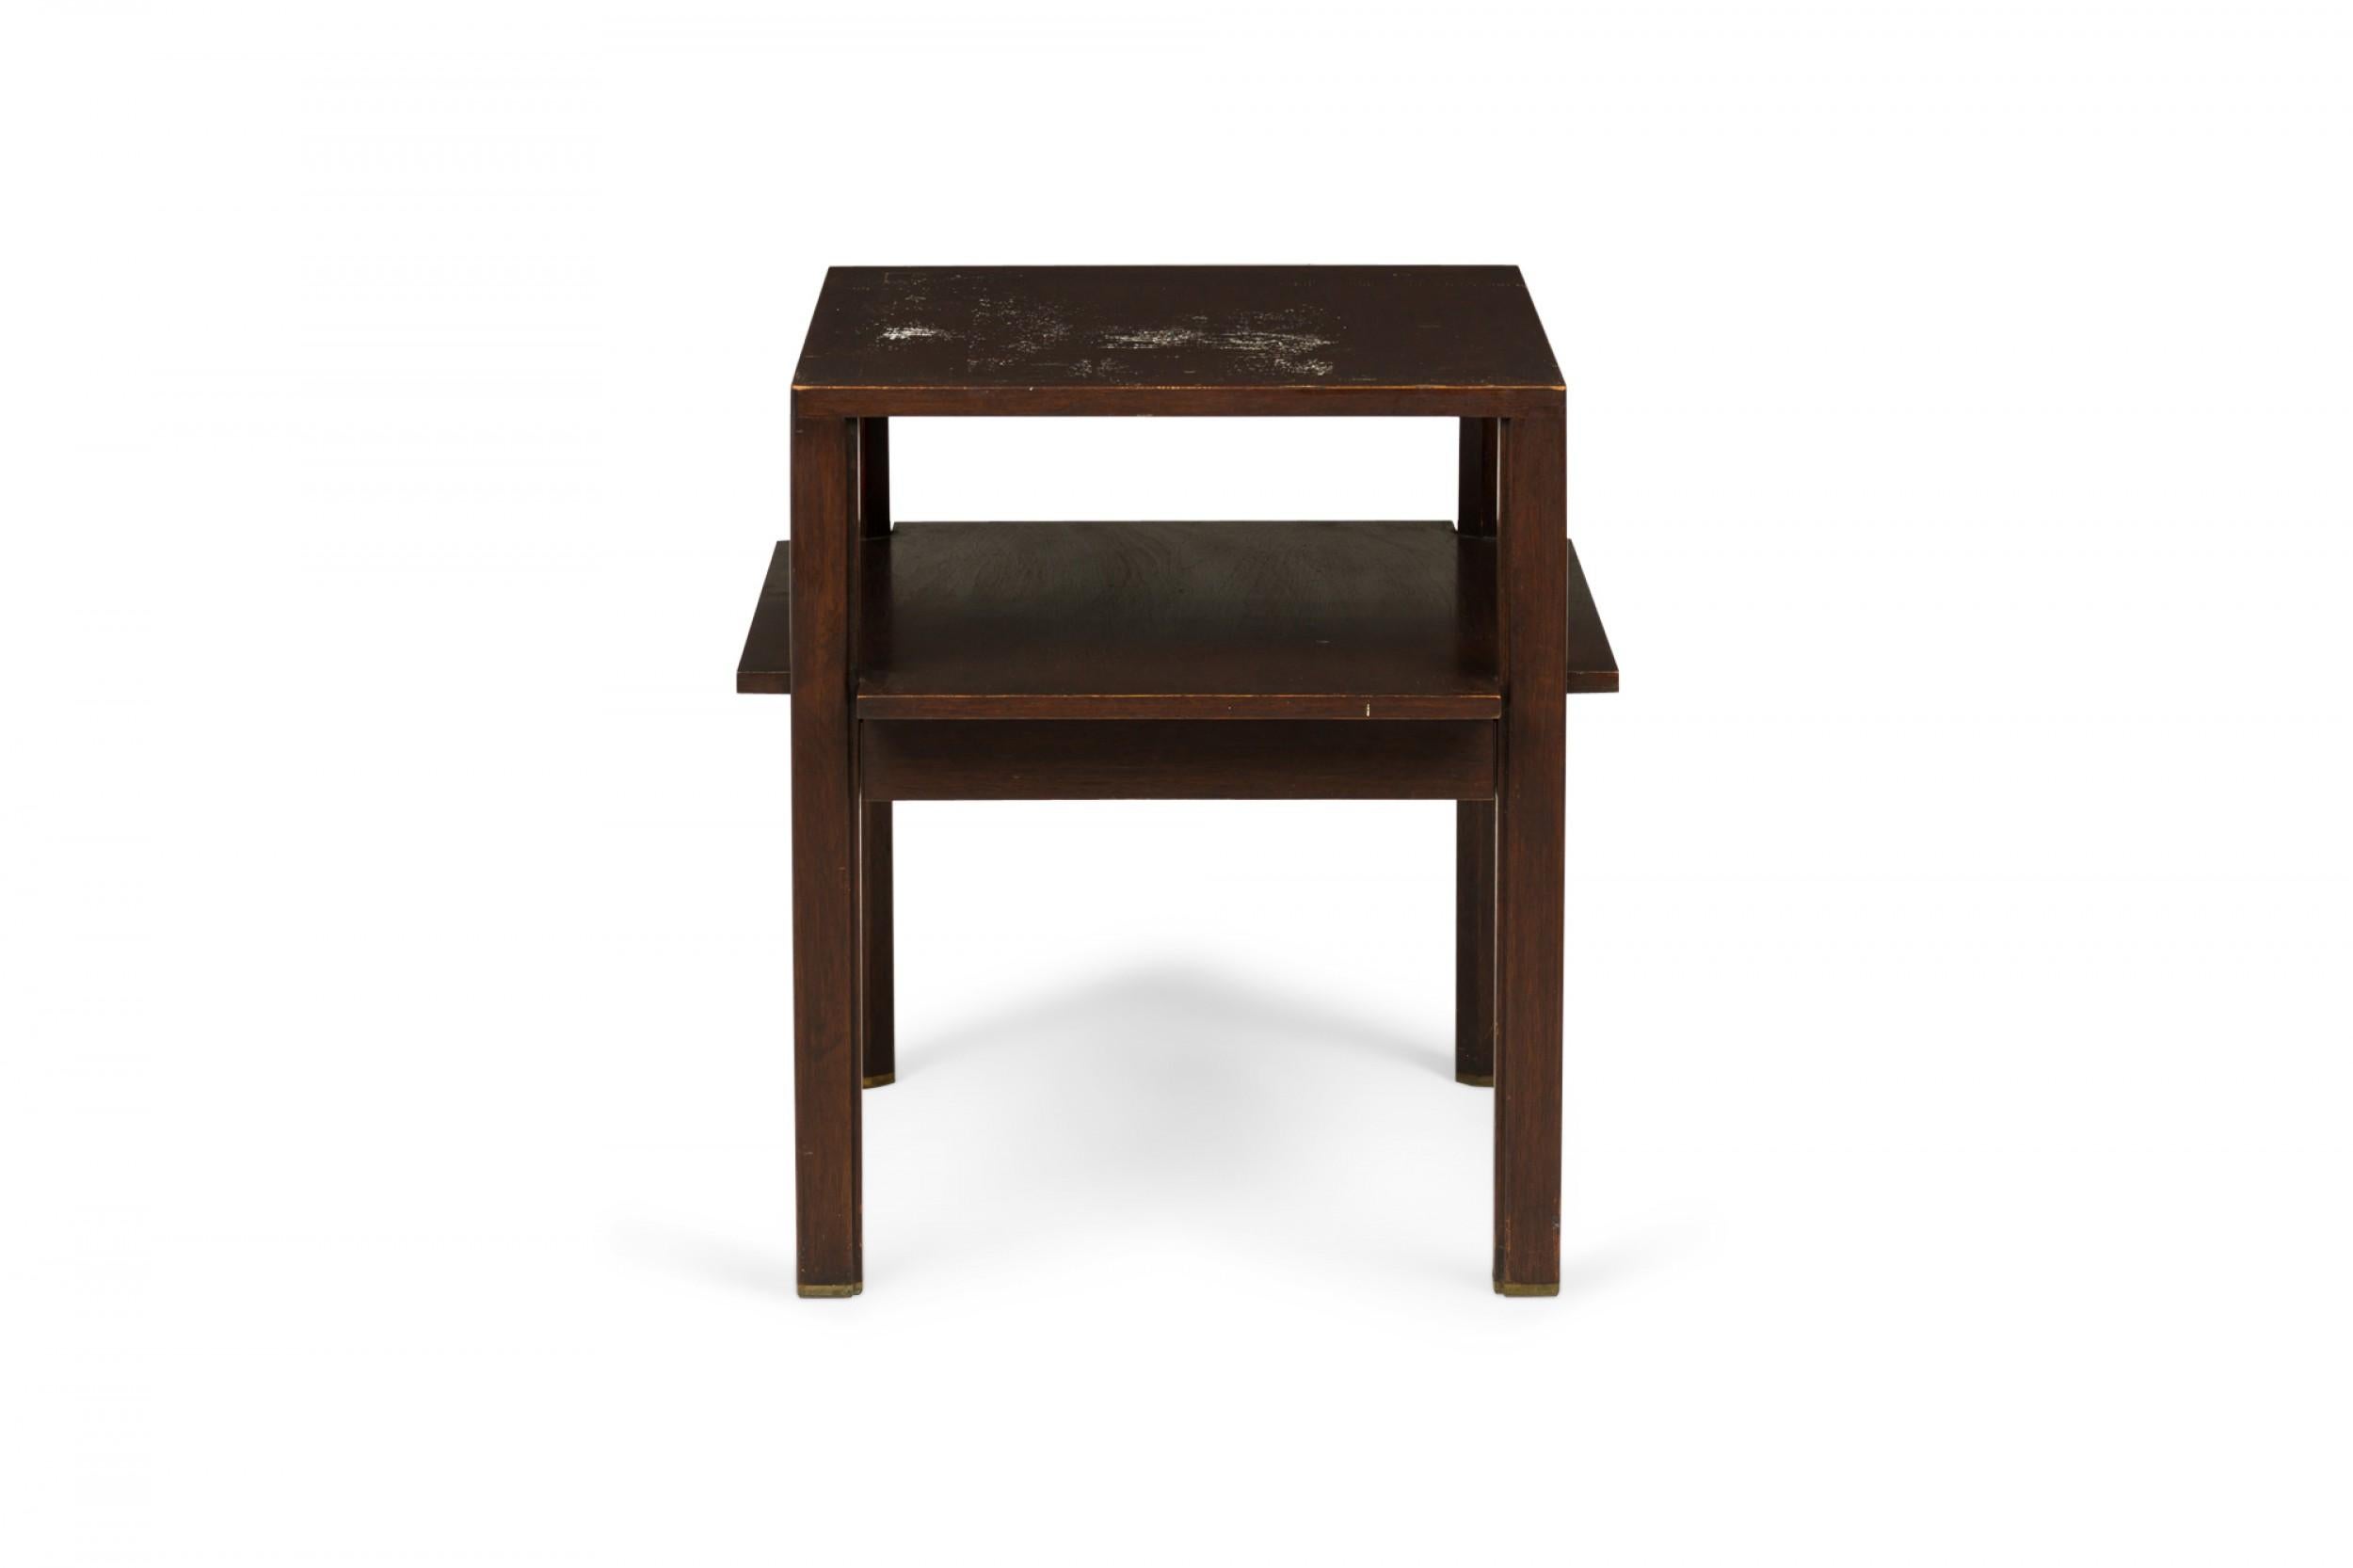 American Mid-Century wooden two-tier end / side table with a dark finish, square top, and slightly larger lower stretcher shelf above a shallow single drawer, supported by four square legs with rounded corners, ending in brass sabots. (EDWARD